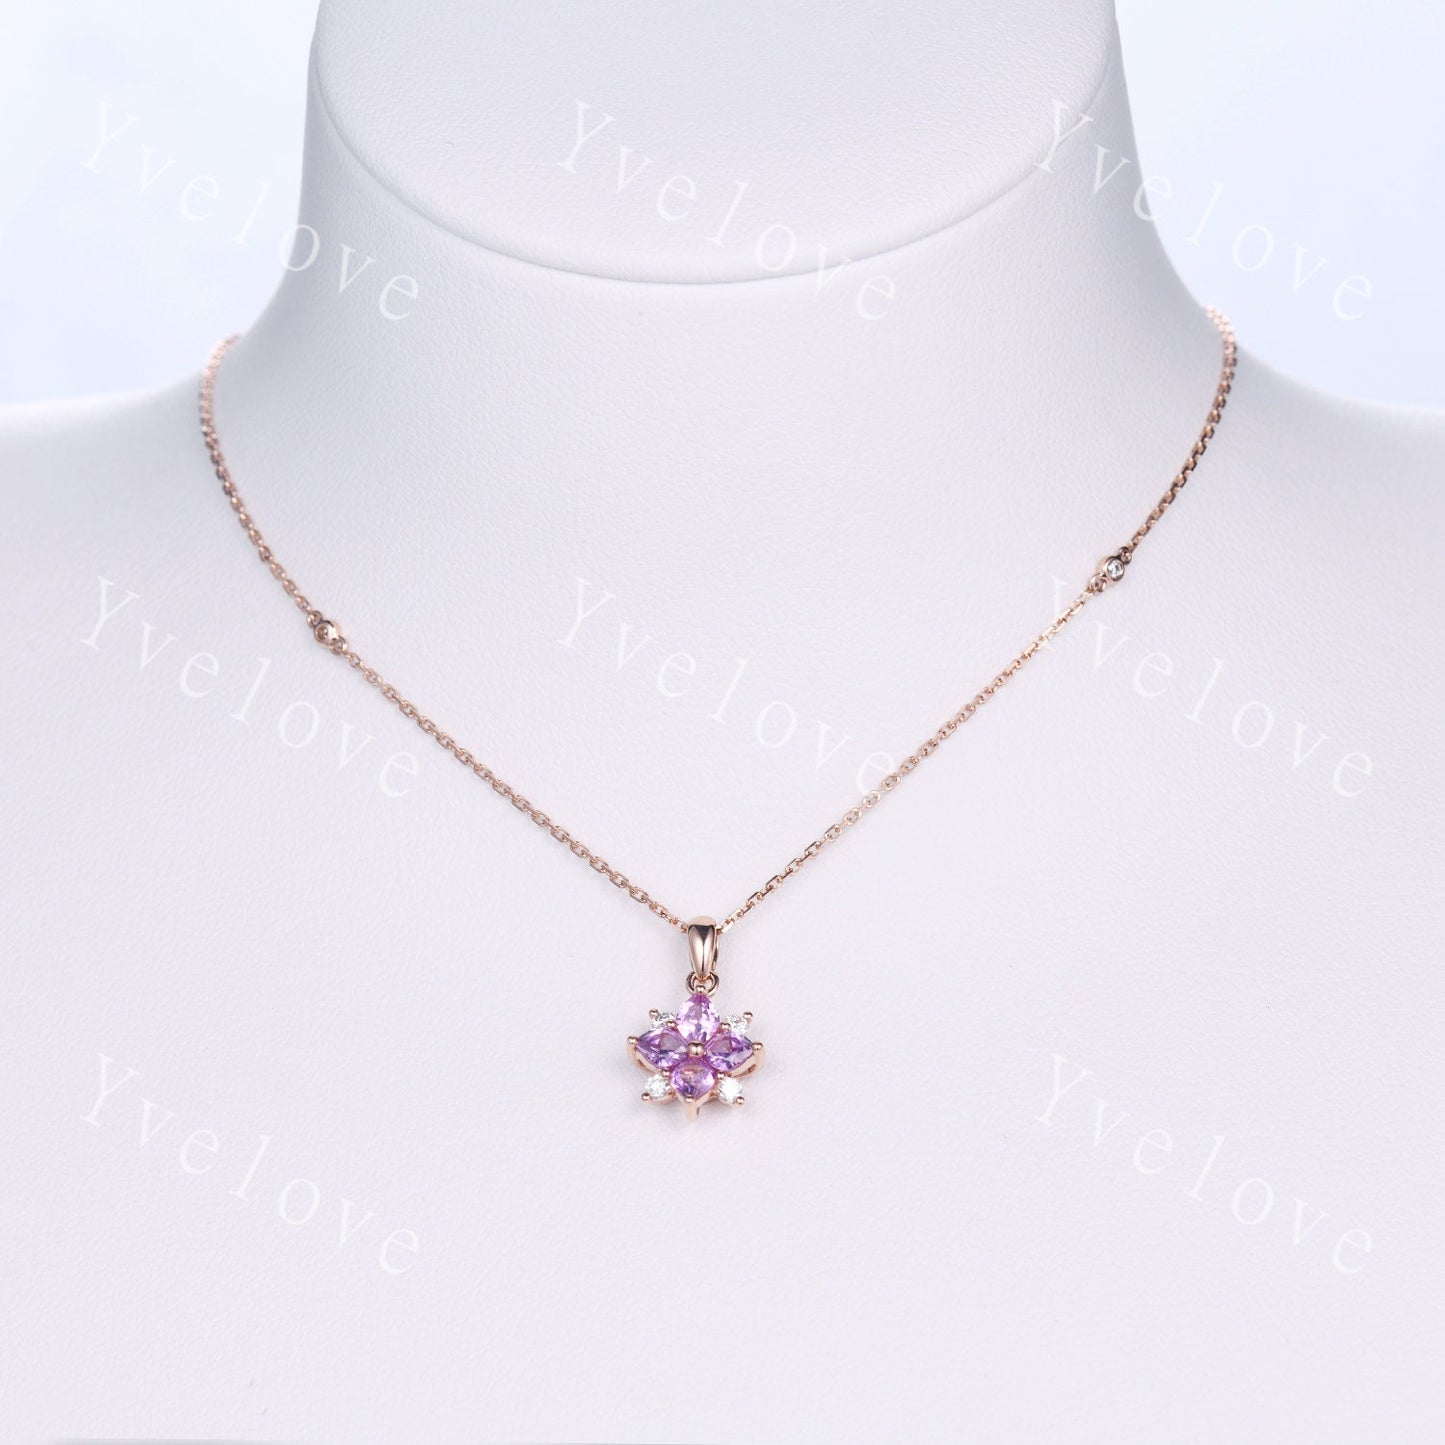 Natural Pink Sapphire Diamond Necklace,Pink Gems Pendant Floral Diamond Jewelry Delicate Dainty Necklace Gift For Women or Her,White Gold